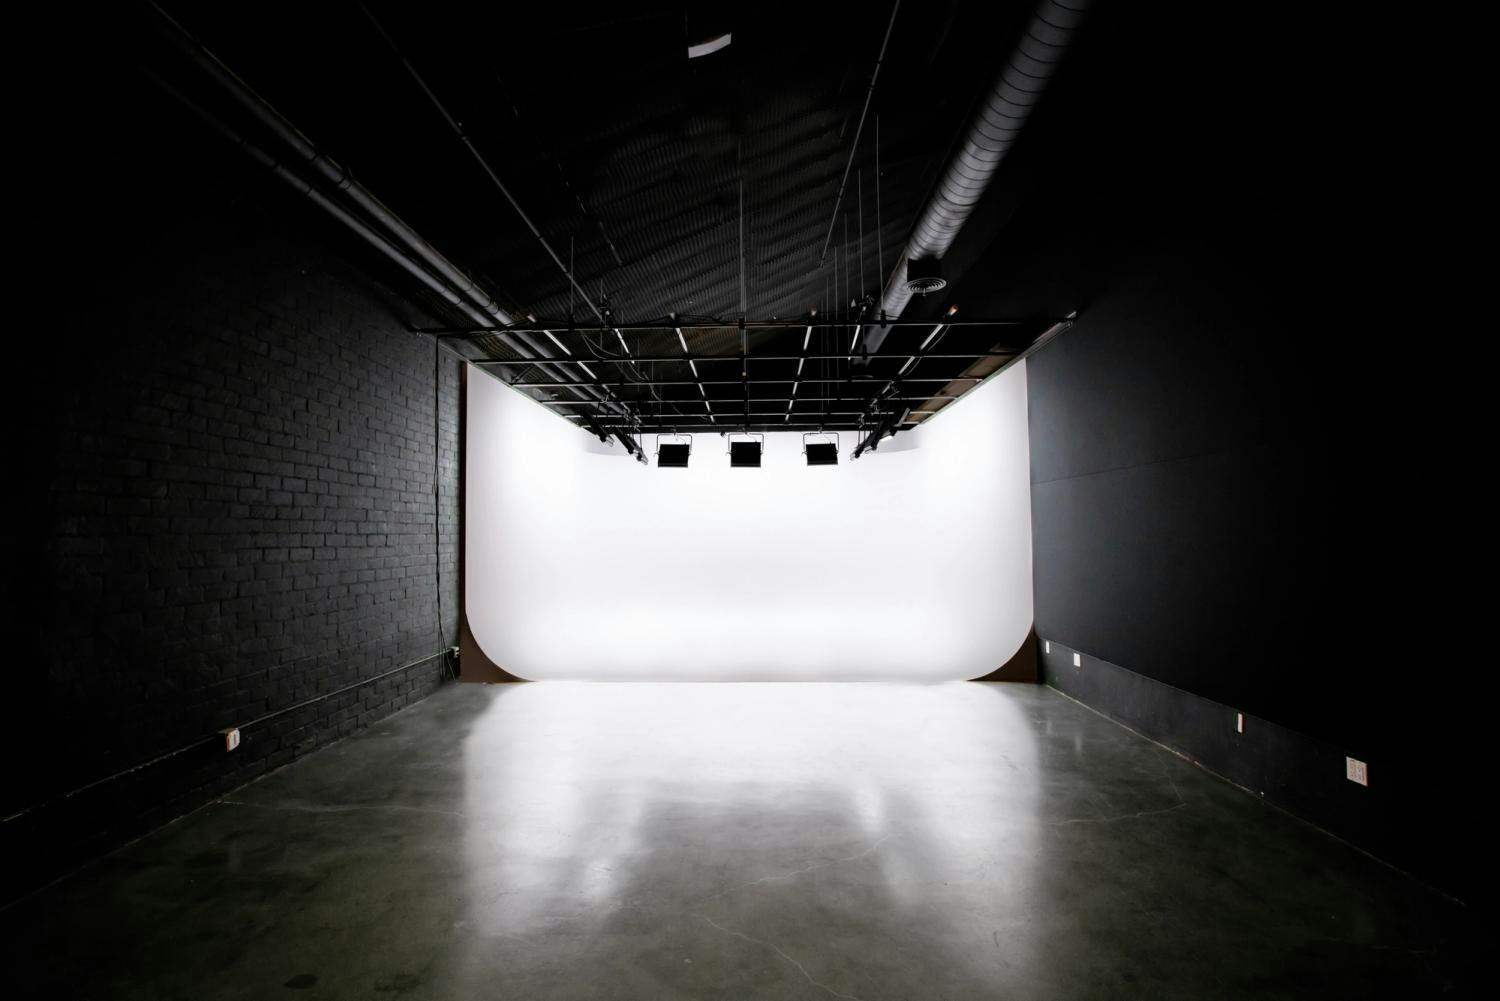 A professional photo studio with a white cyclorama and a grid of ceiling-mounted lights casting a soft glow on the curved backdrop.